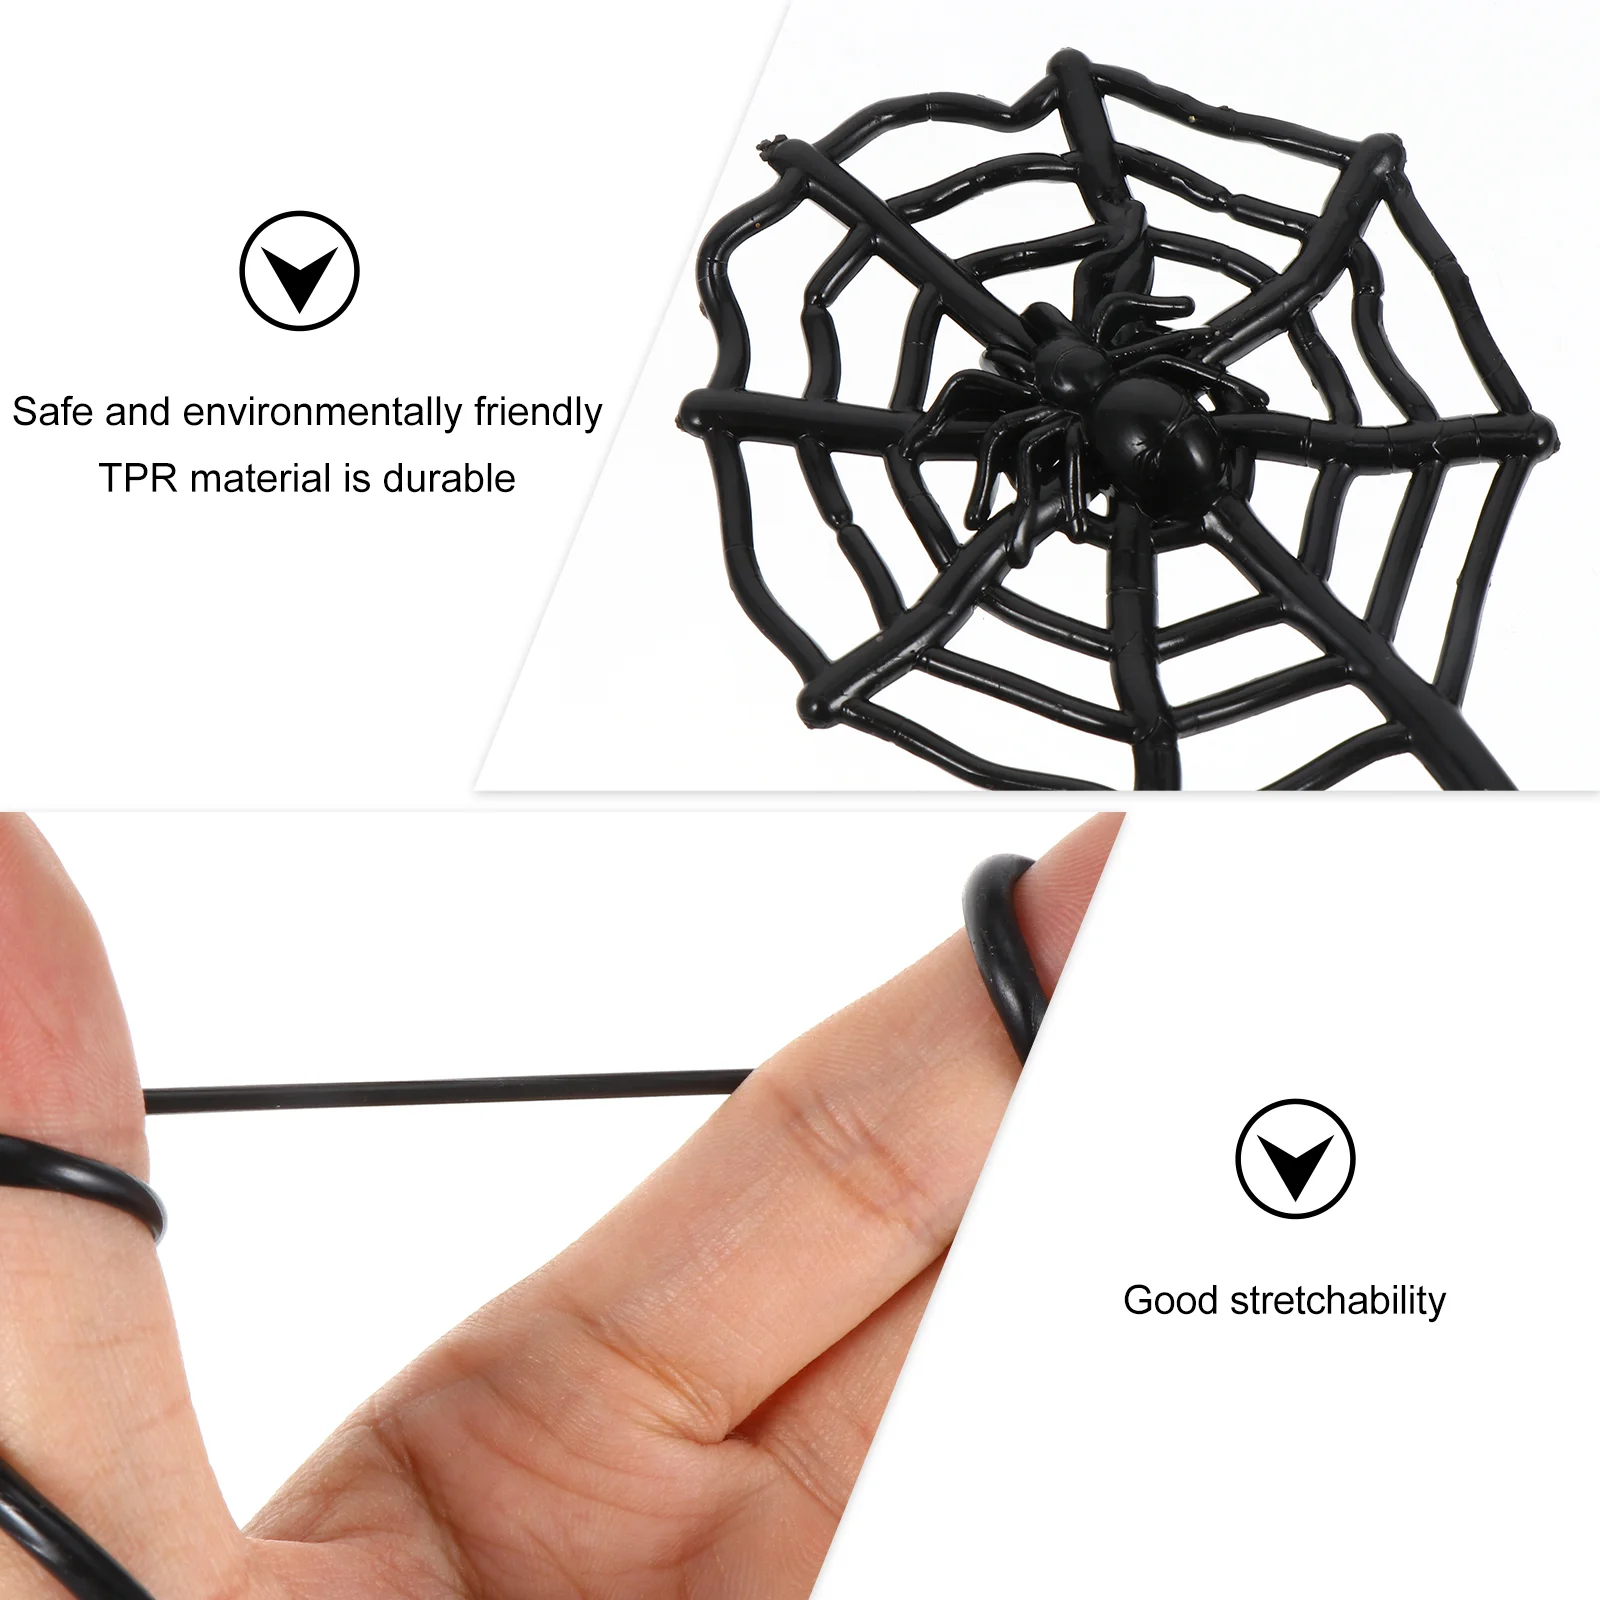 

20 Pcs Viscous Spider Web Halloween Prank Toys Kids Presents Telescopic Playthings Festival Gifts for Tpr Child